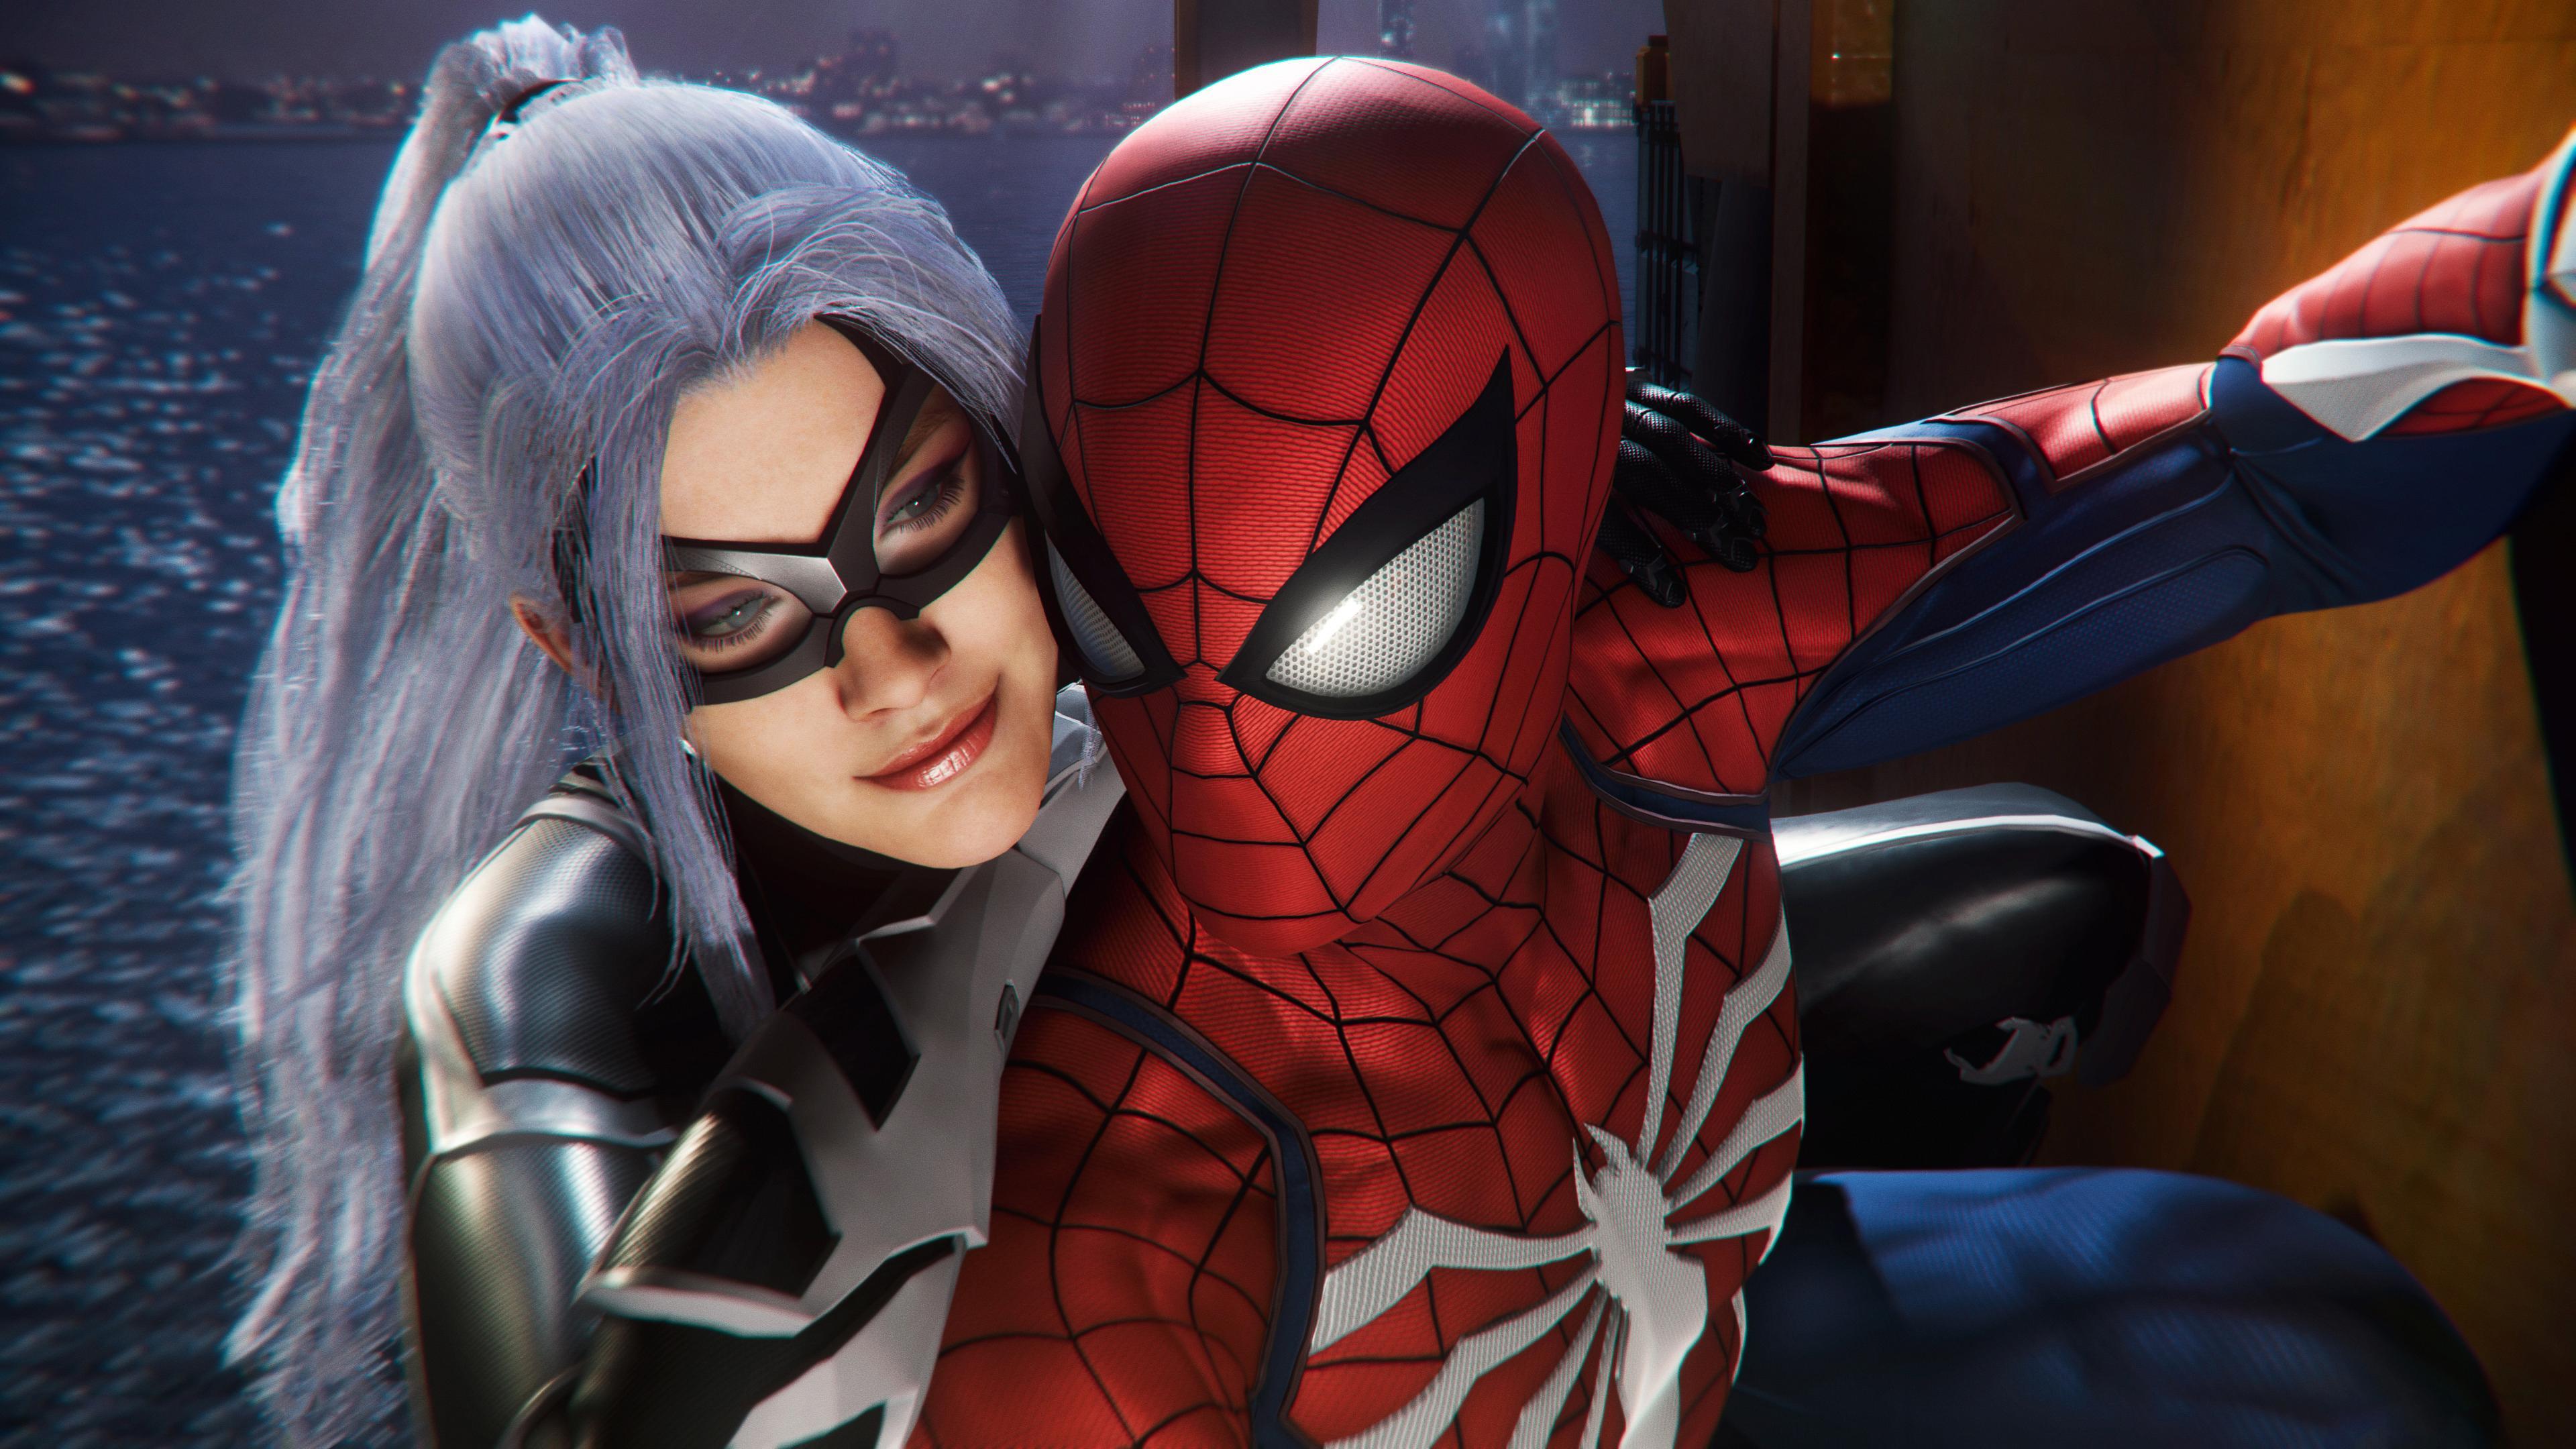 Spiderman And Felicia Hardy In Spiderman Ps4 1440P